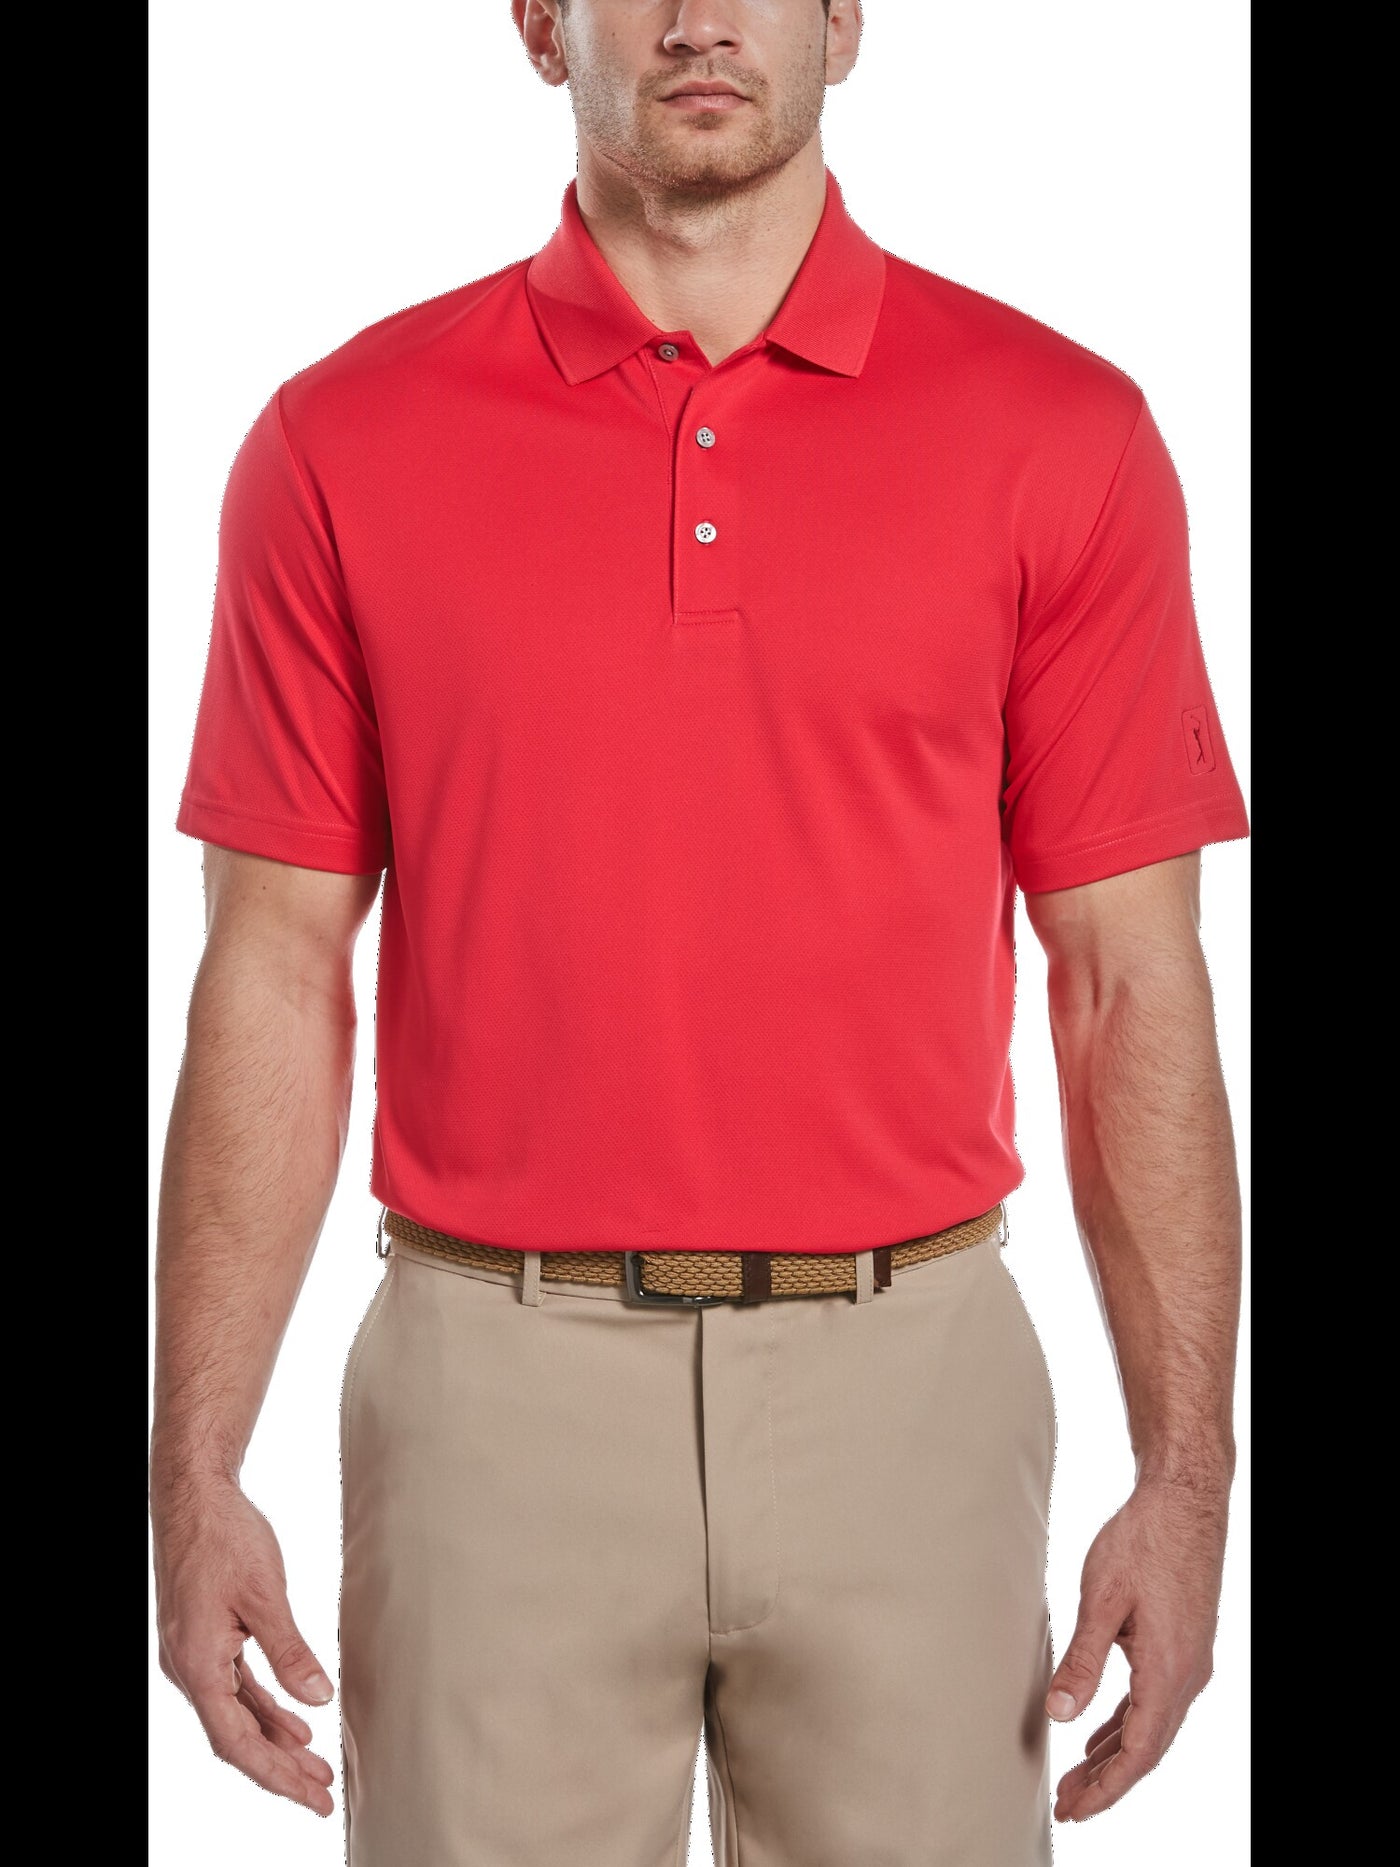 HYBRID APPAREL Mens Coral Athletic Fit Moisture Wicking Polo L